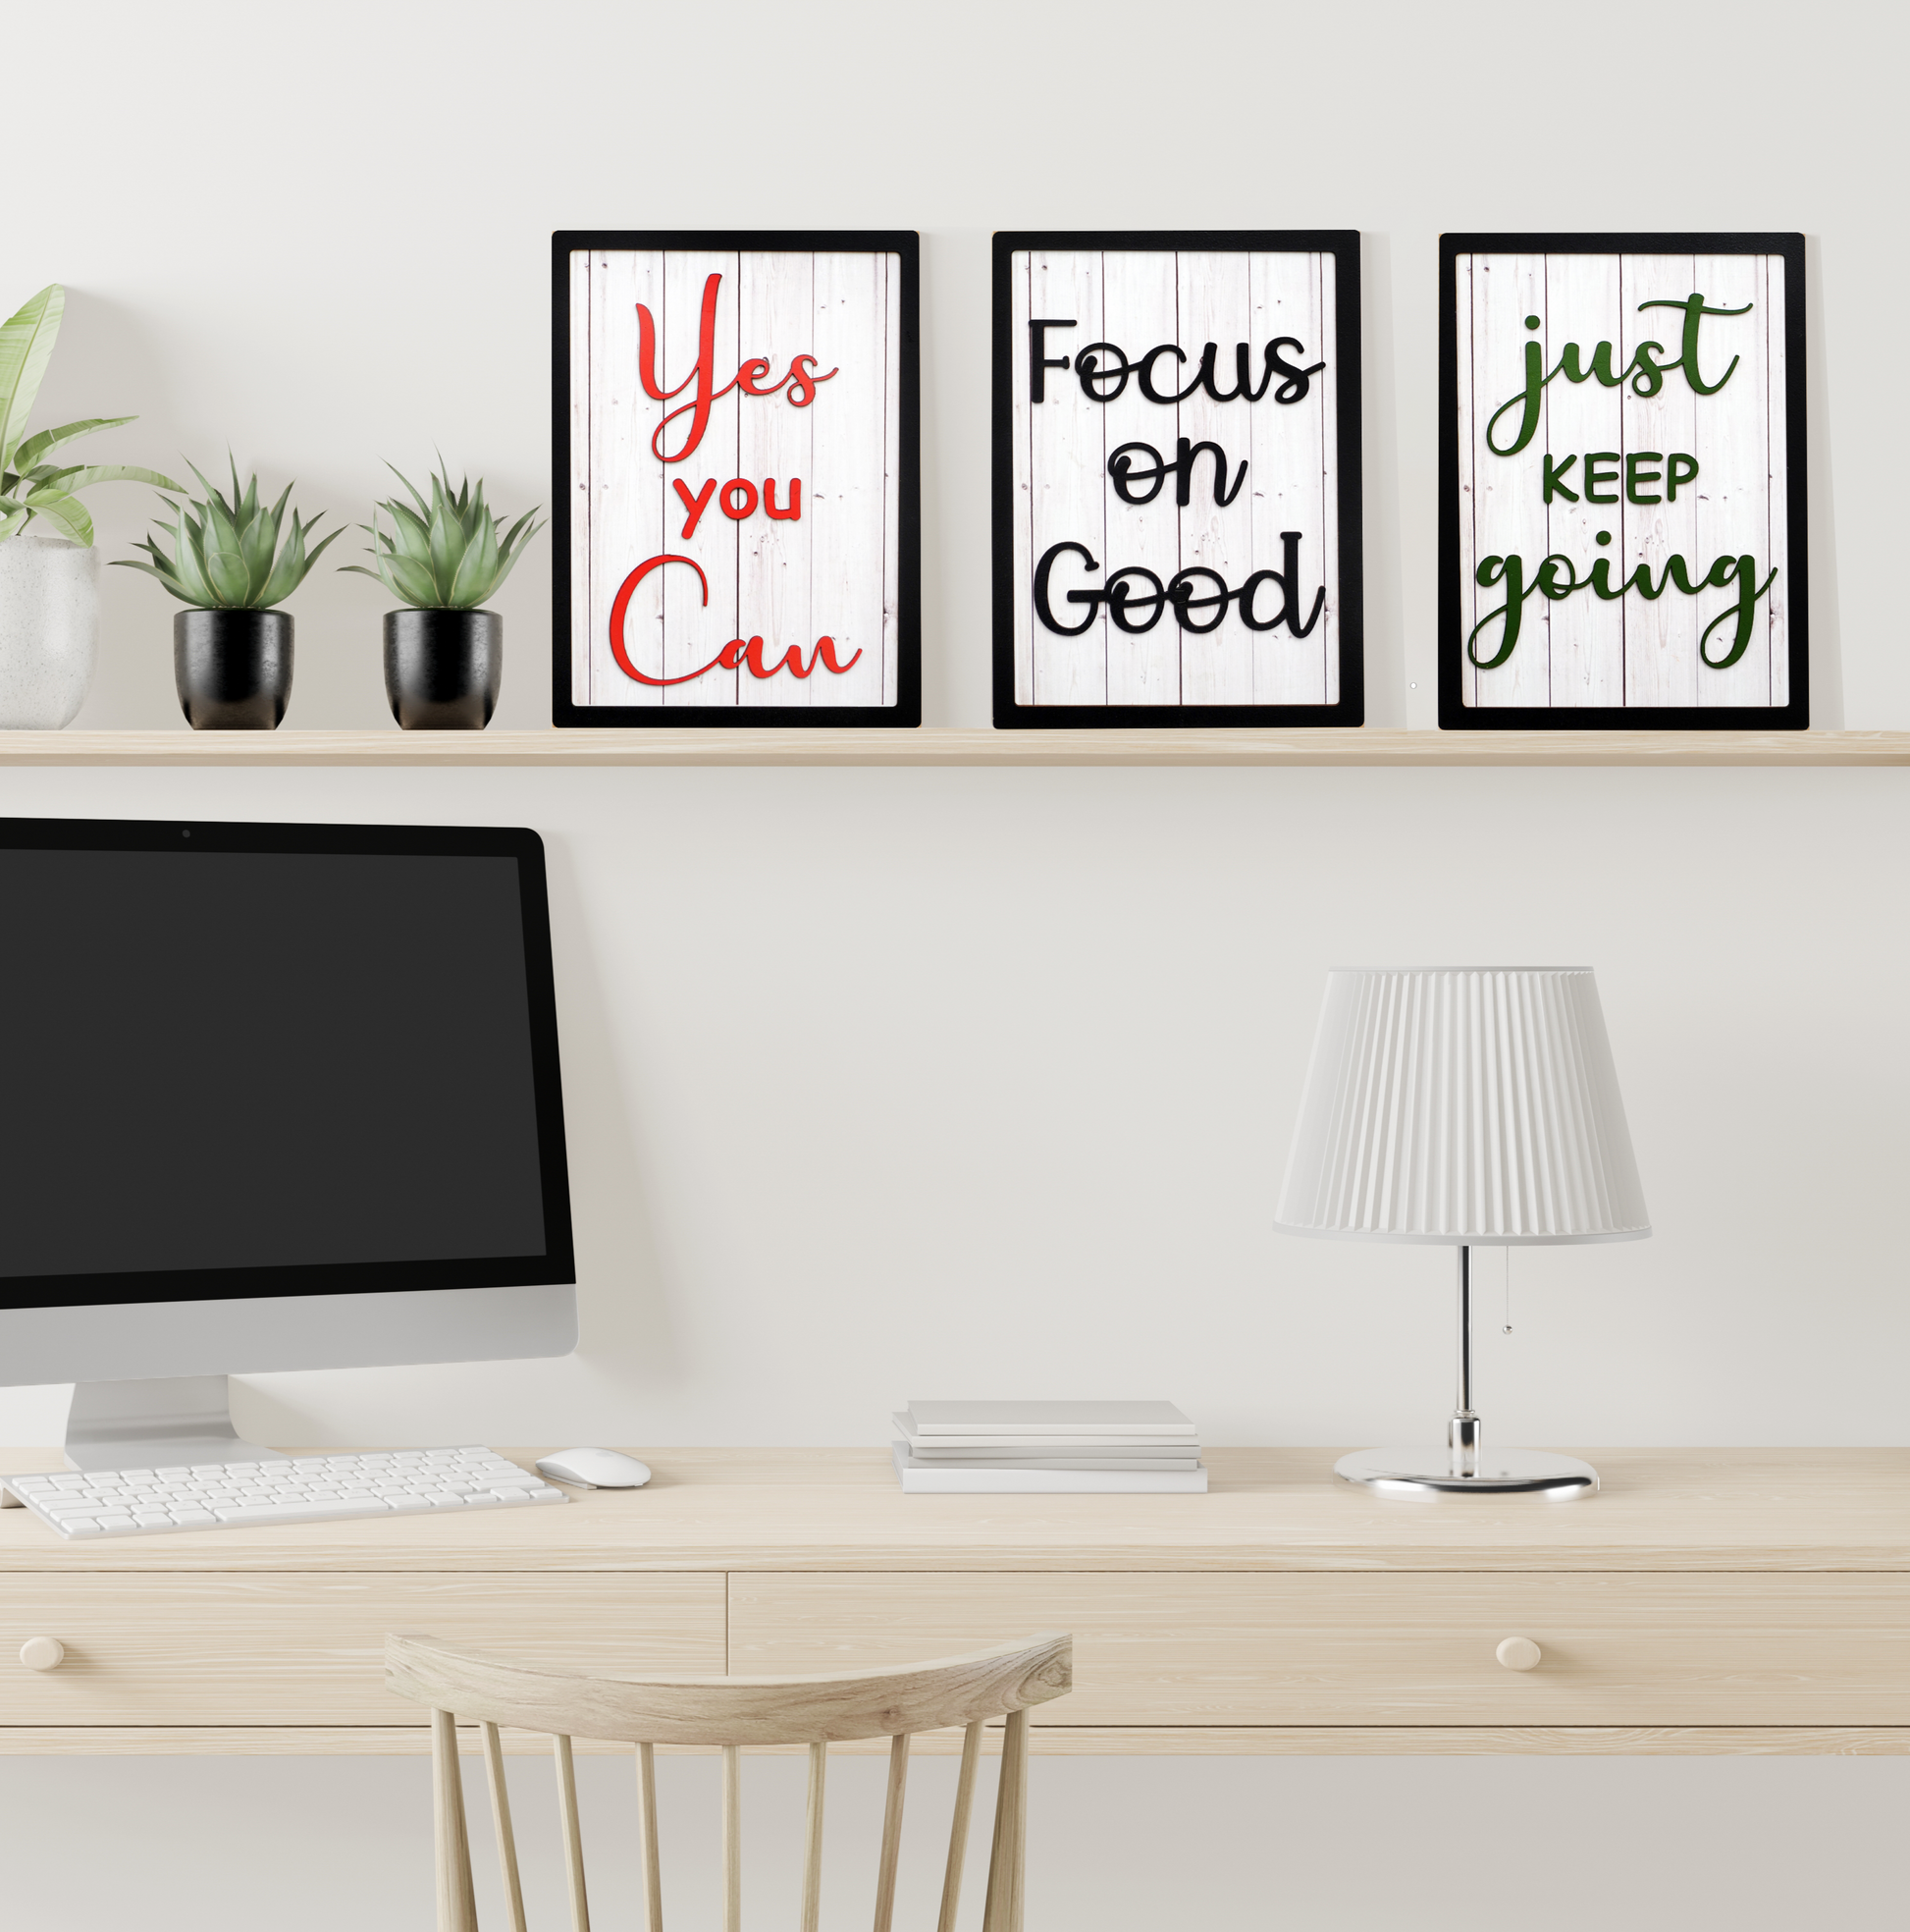 yes-you-can Canvas Art - Quotes & Motivation posters in India